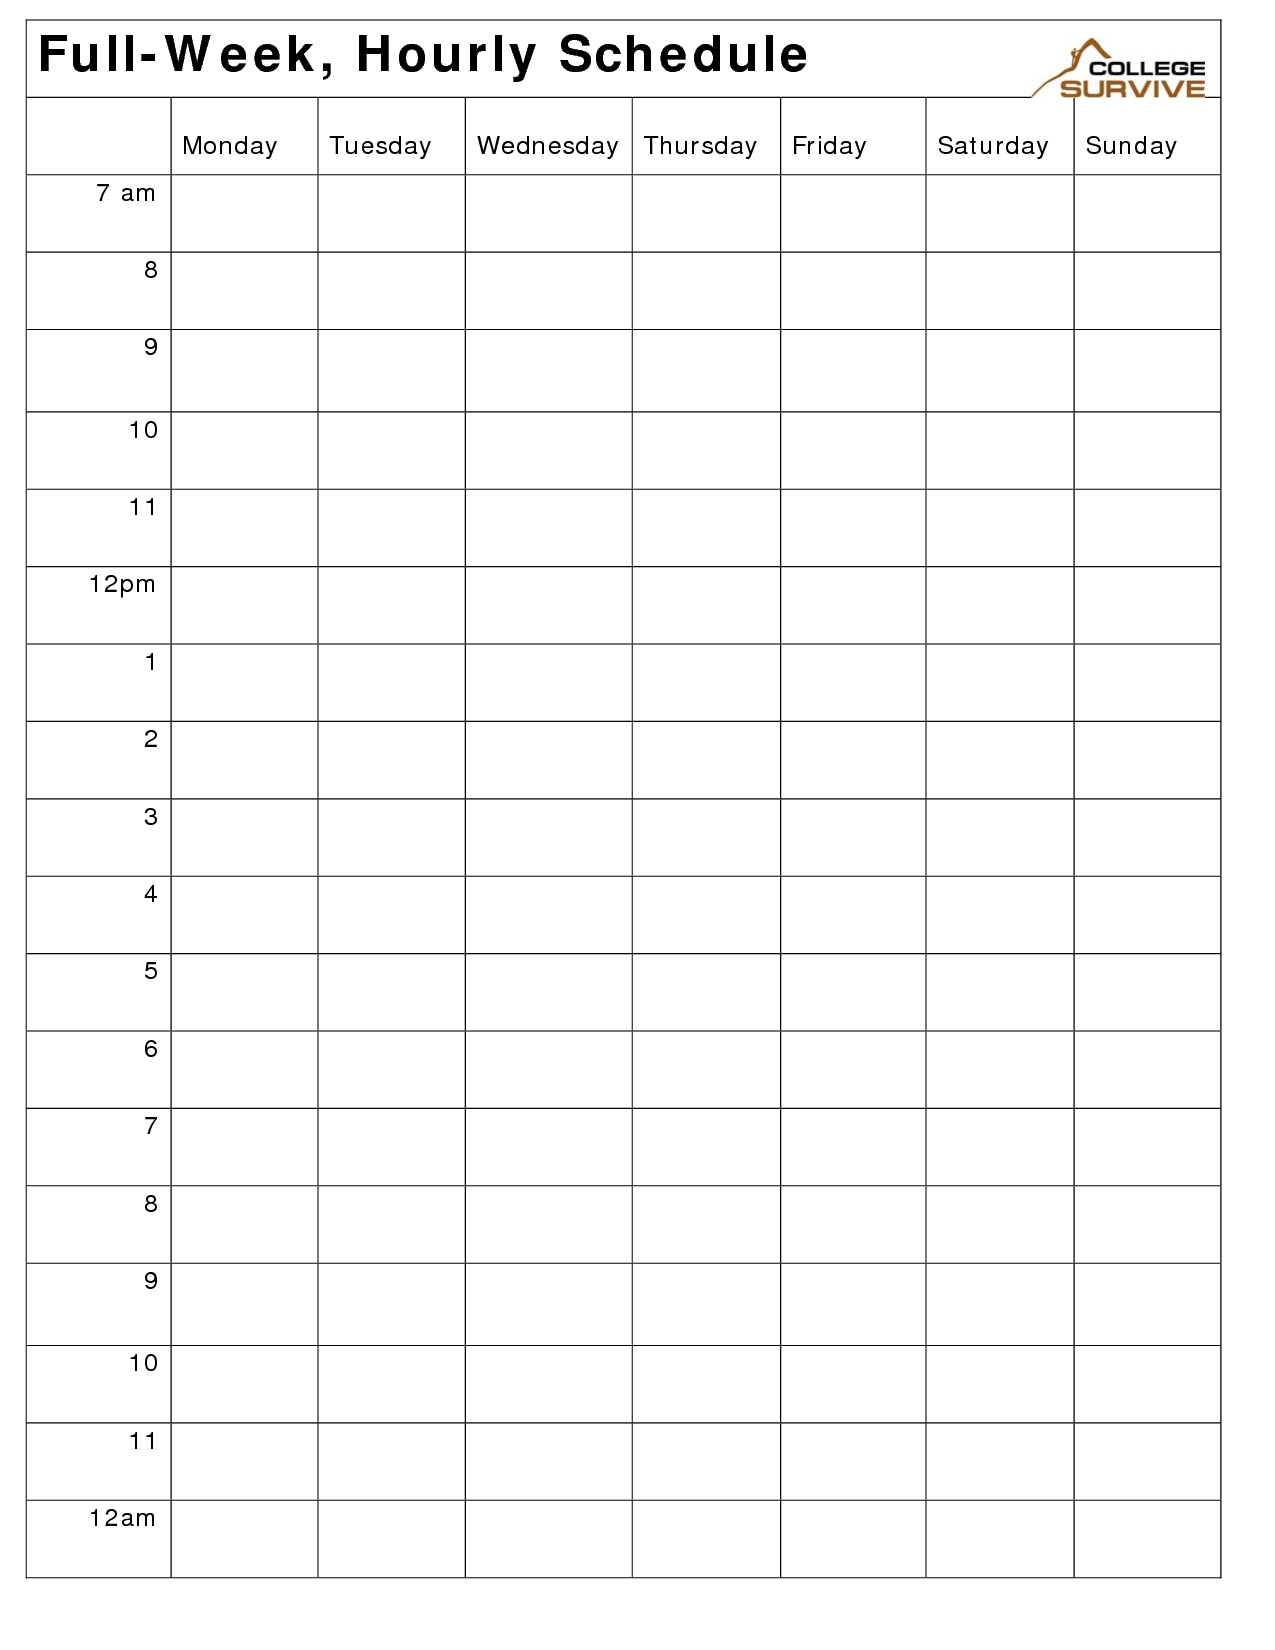 Image Result For Today Planner | Free Printables | Schedule for Weekly Calendar Template With Time Slots